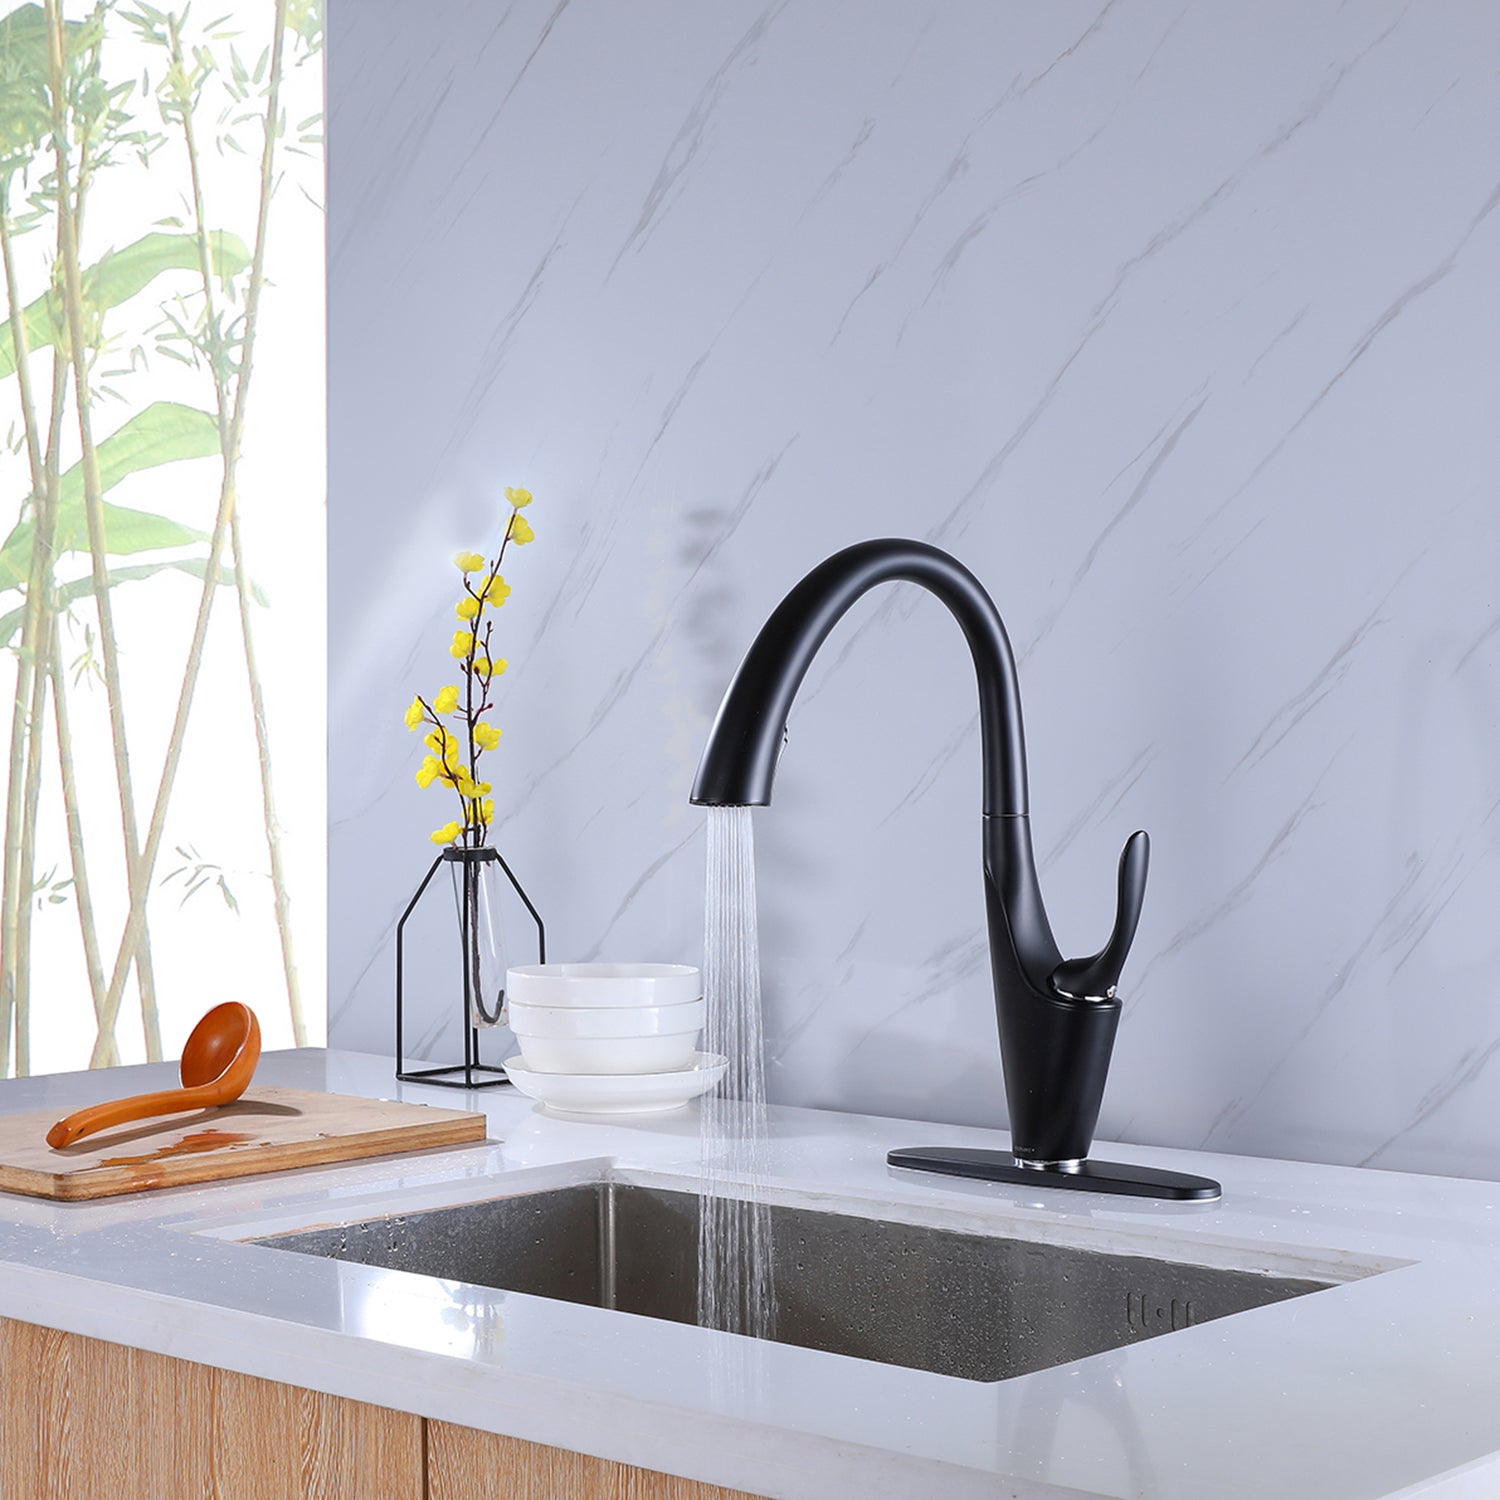 5 Trends in Kitchen Faucets